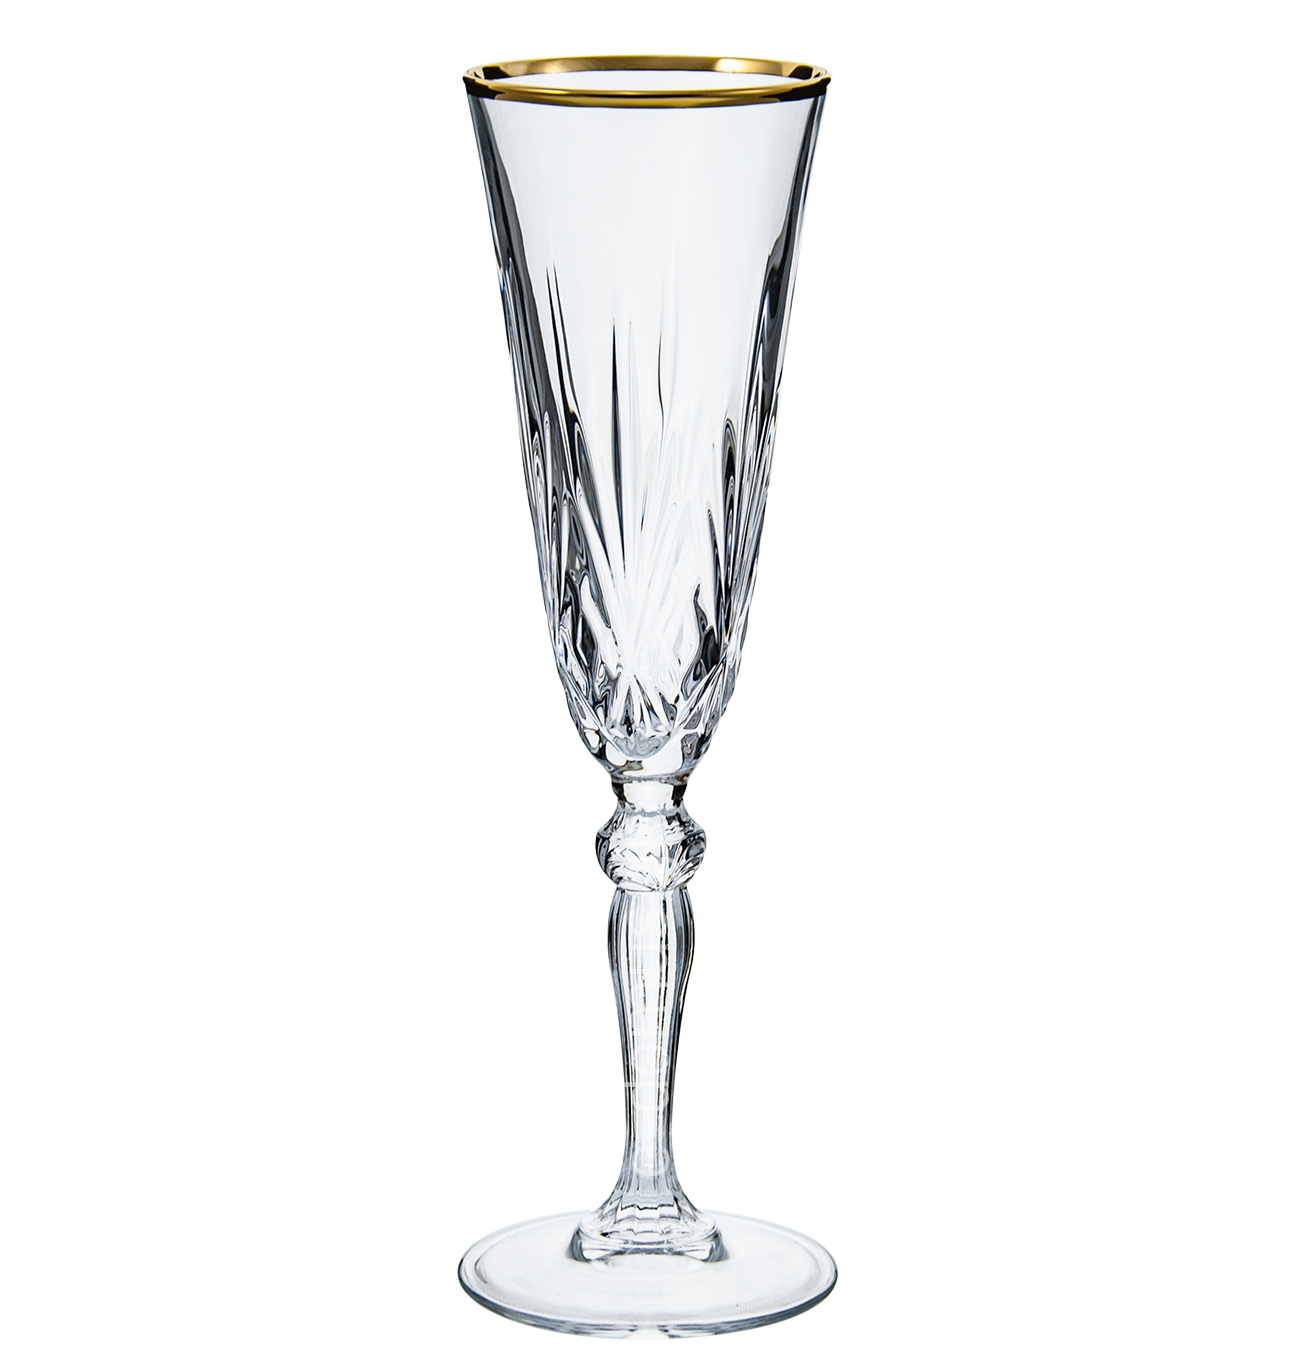 MELODIA GOLD Flute CHAMPAGNE glass 160ml RCR ITALY